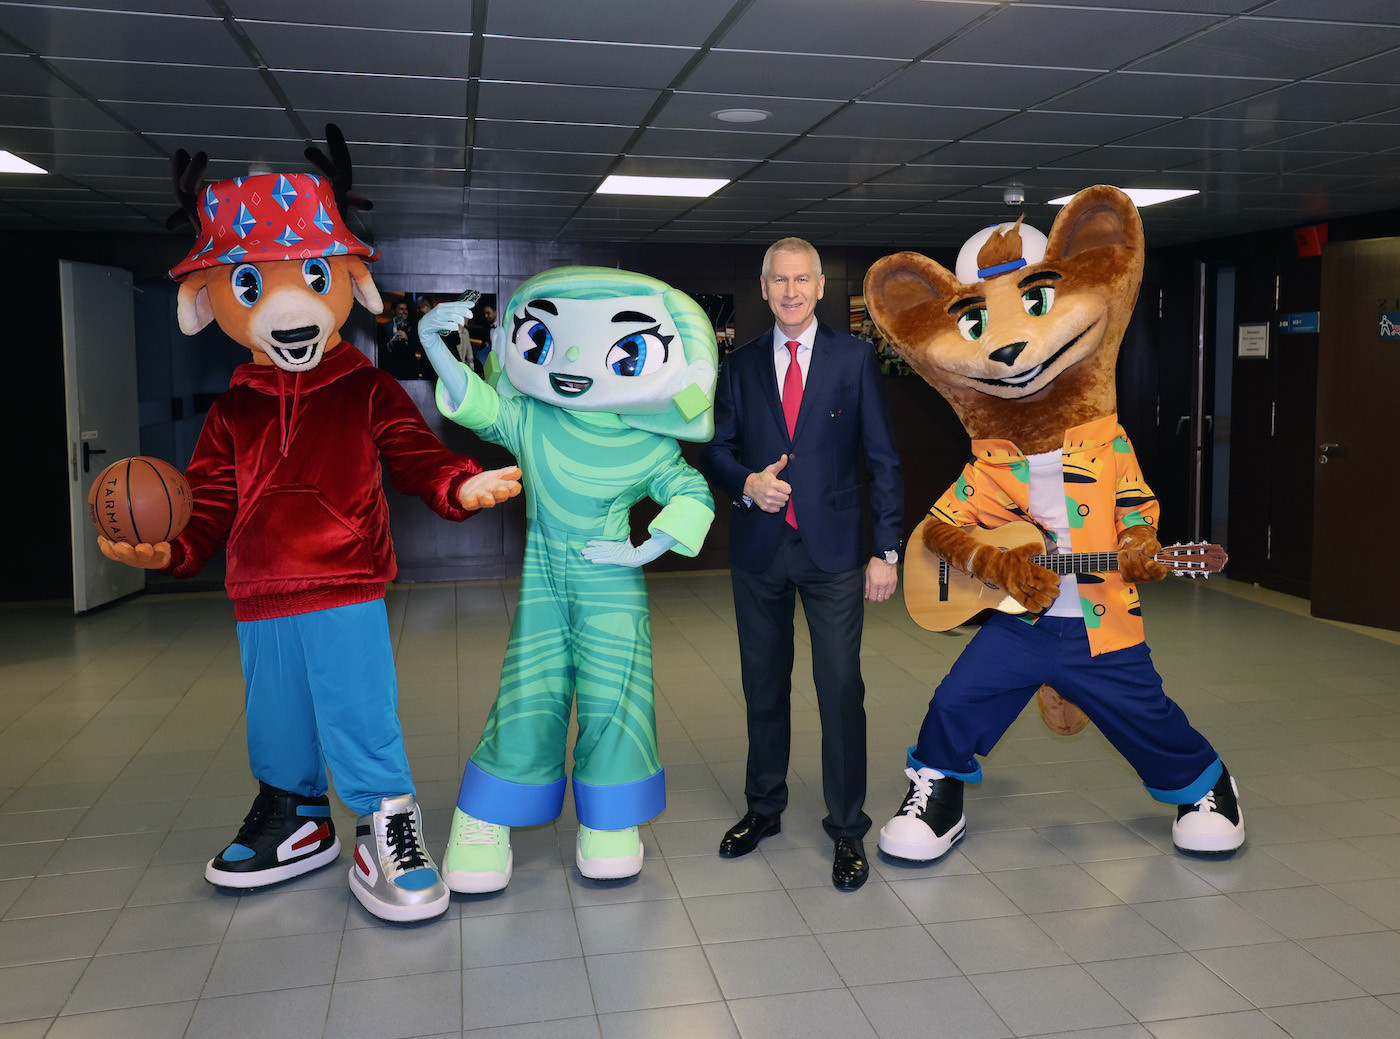 Former FISU President and current Russian Sports Minister Oleg Matytsin poses with the Yekaterinburg 2023 mascots, before the World University Games were removed from the city ©FISU